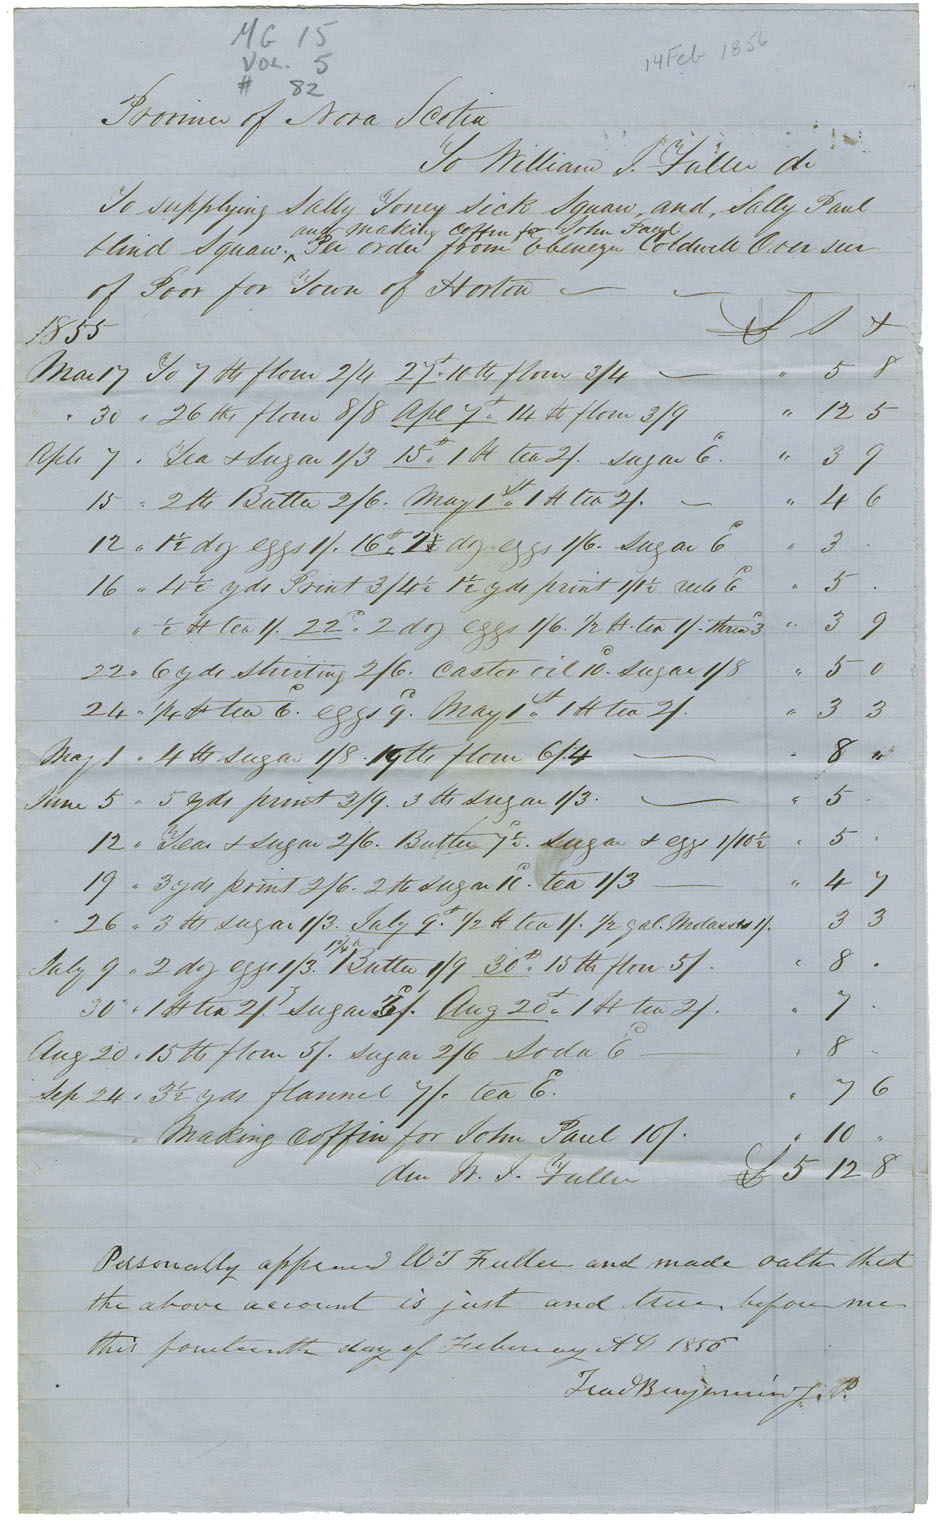 Petition of William J. Fuller for payment for supplies for Sally Toney and Sally Paul, an for making a coffin for John Paul of Horton.